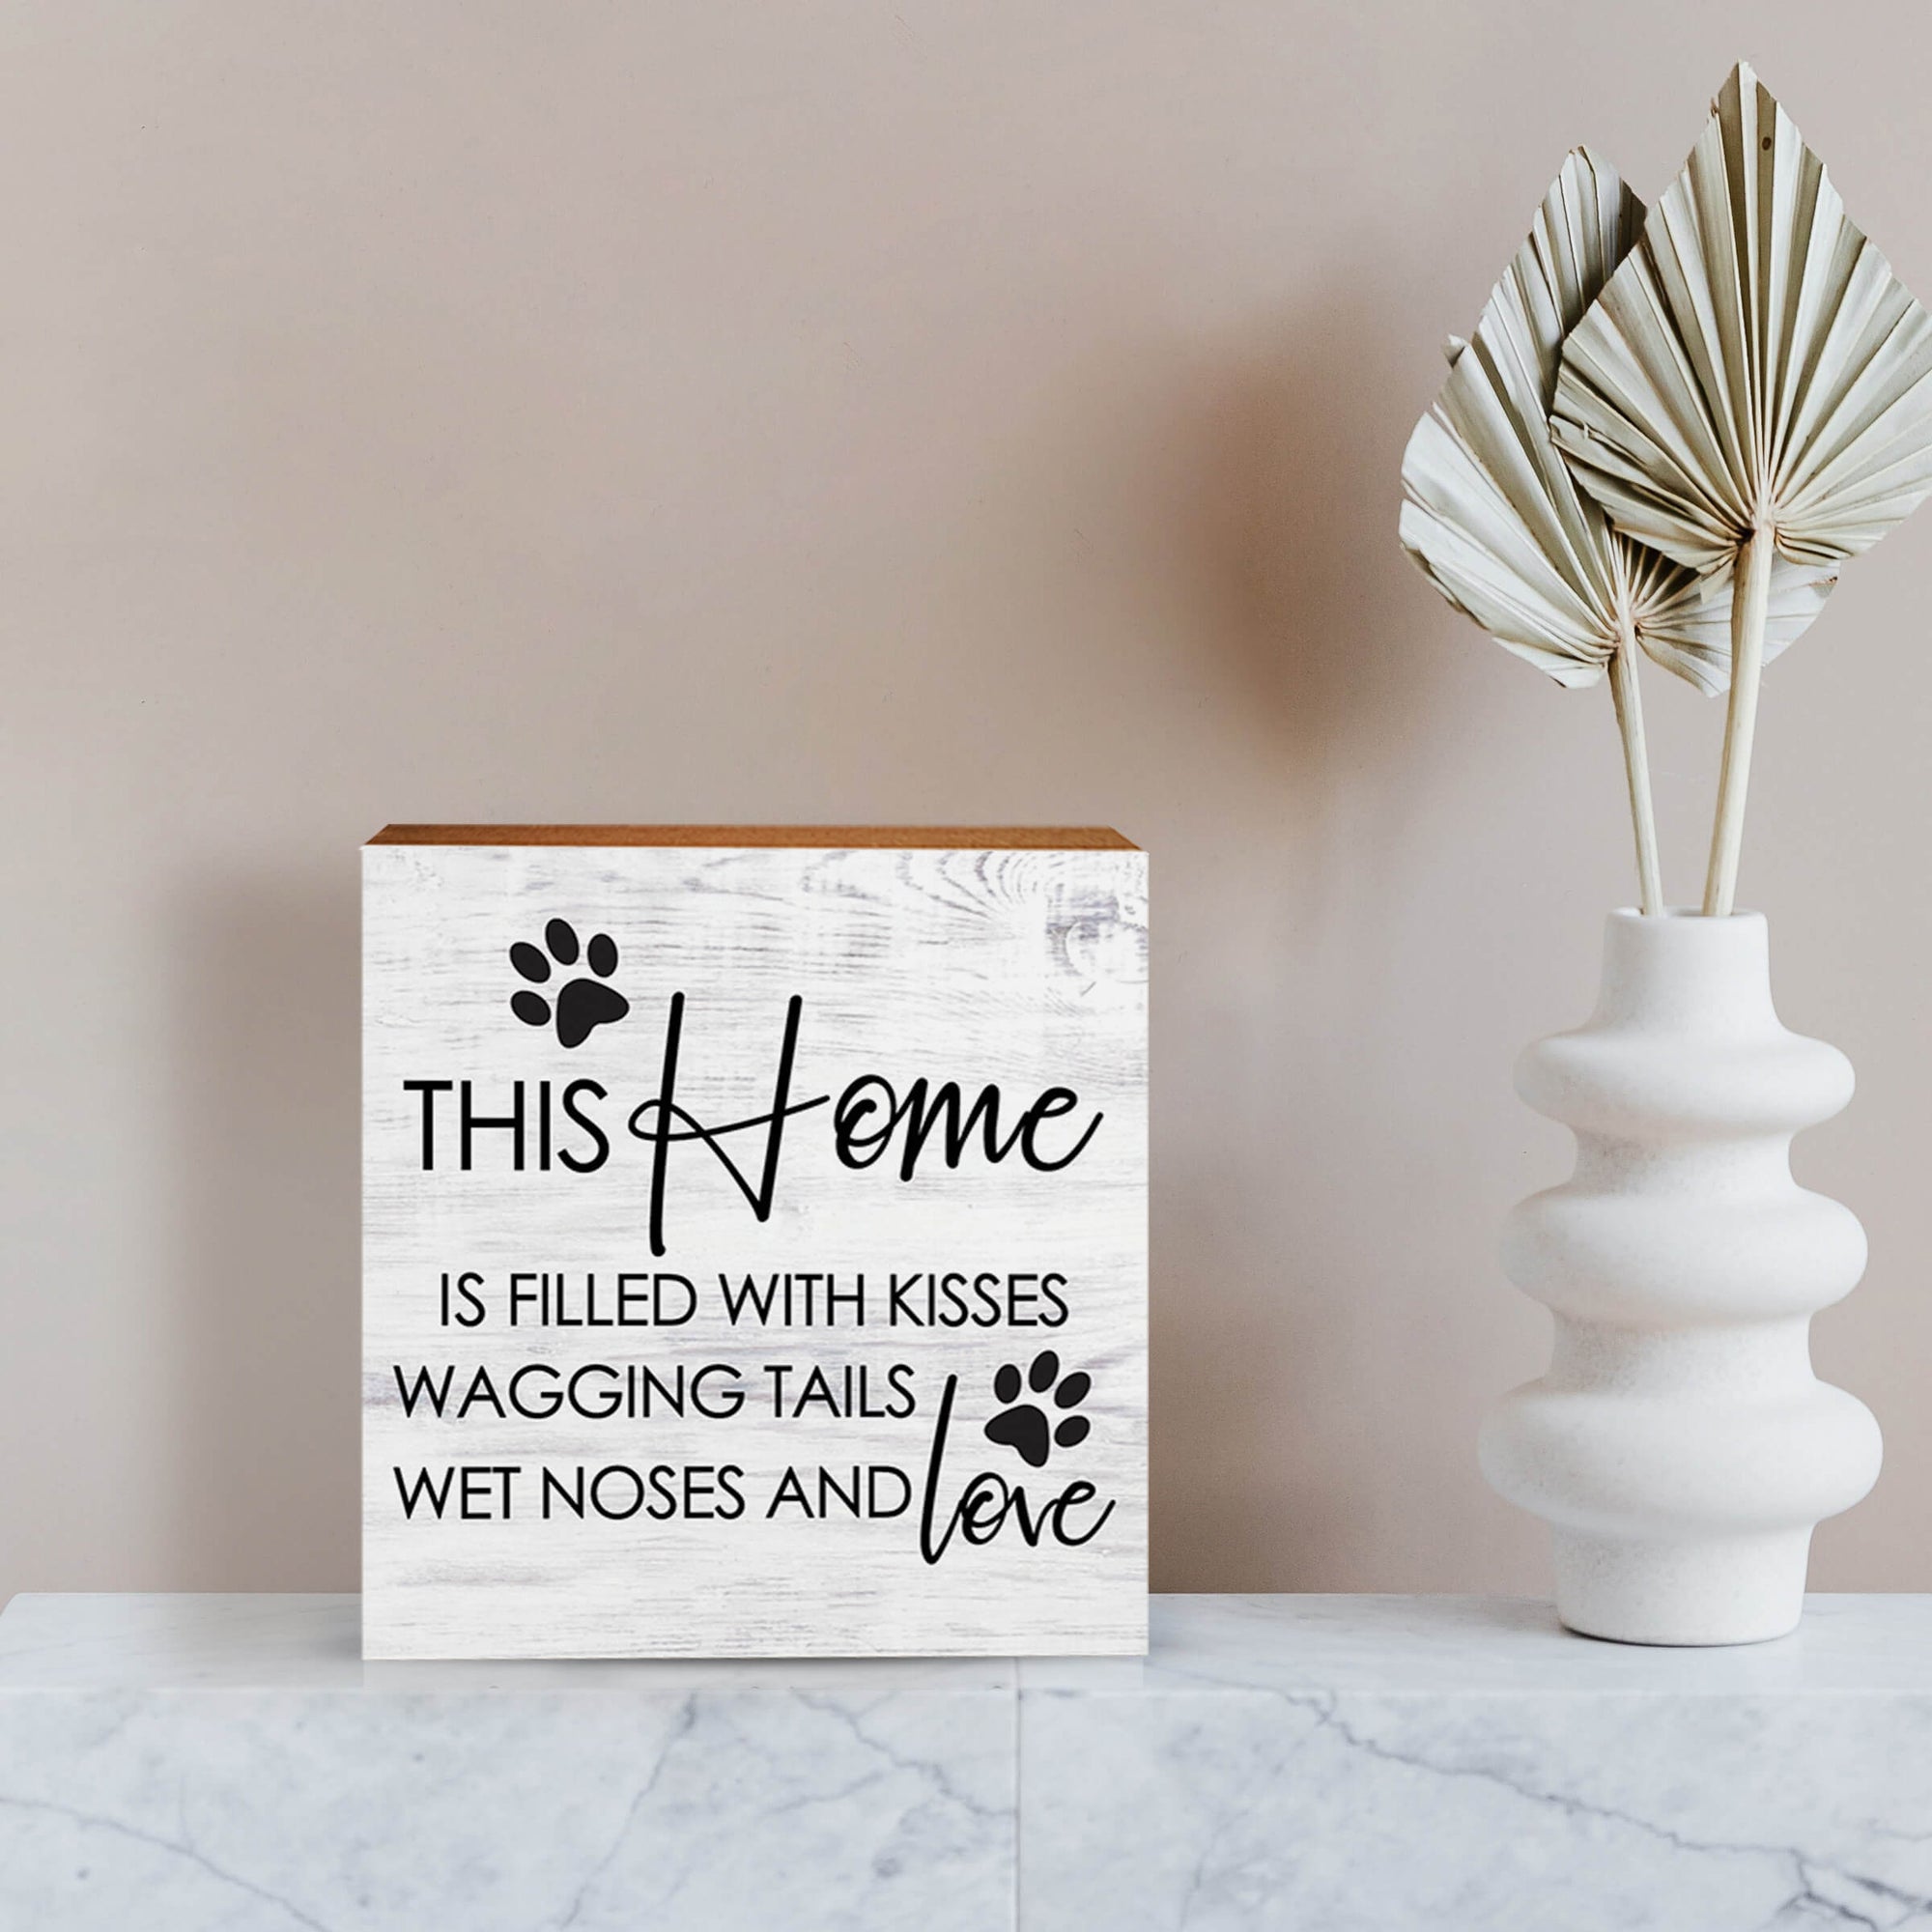 Wooden Shelf Decor and Tabletop Signs with Pet Verses - This Home Is Filled